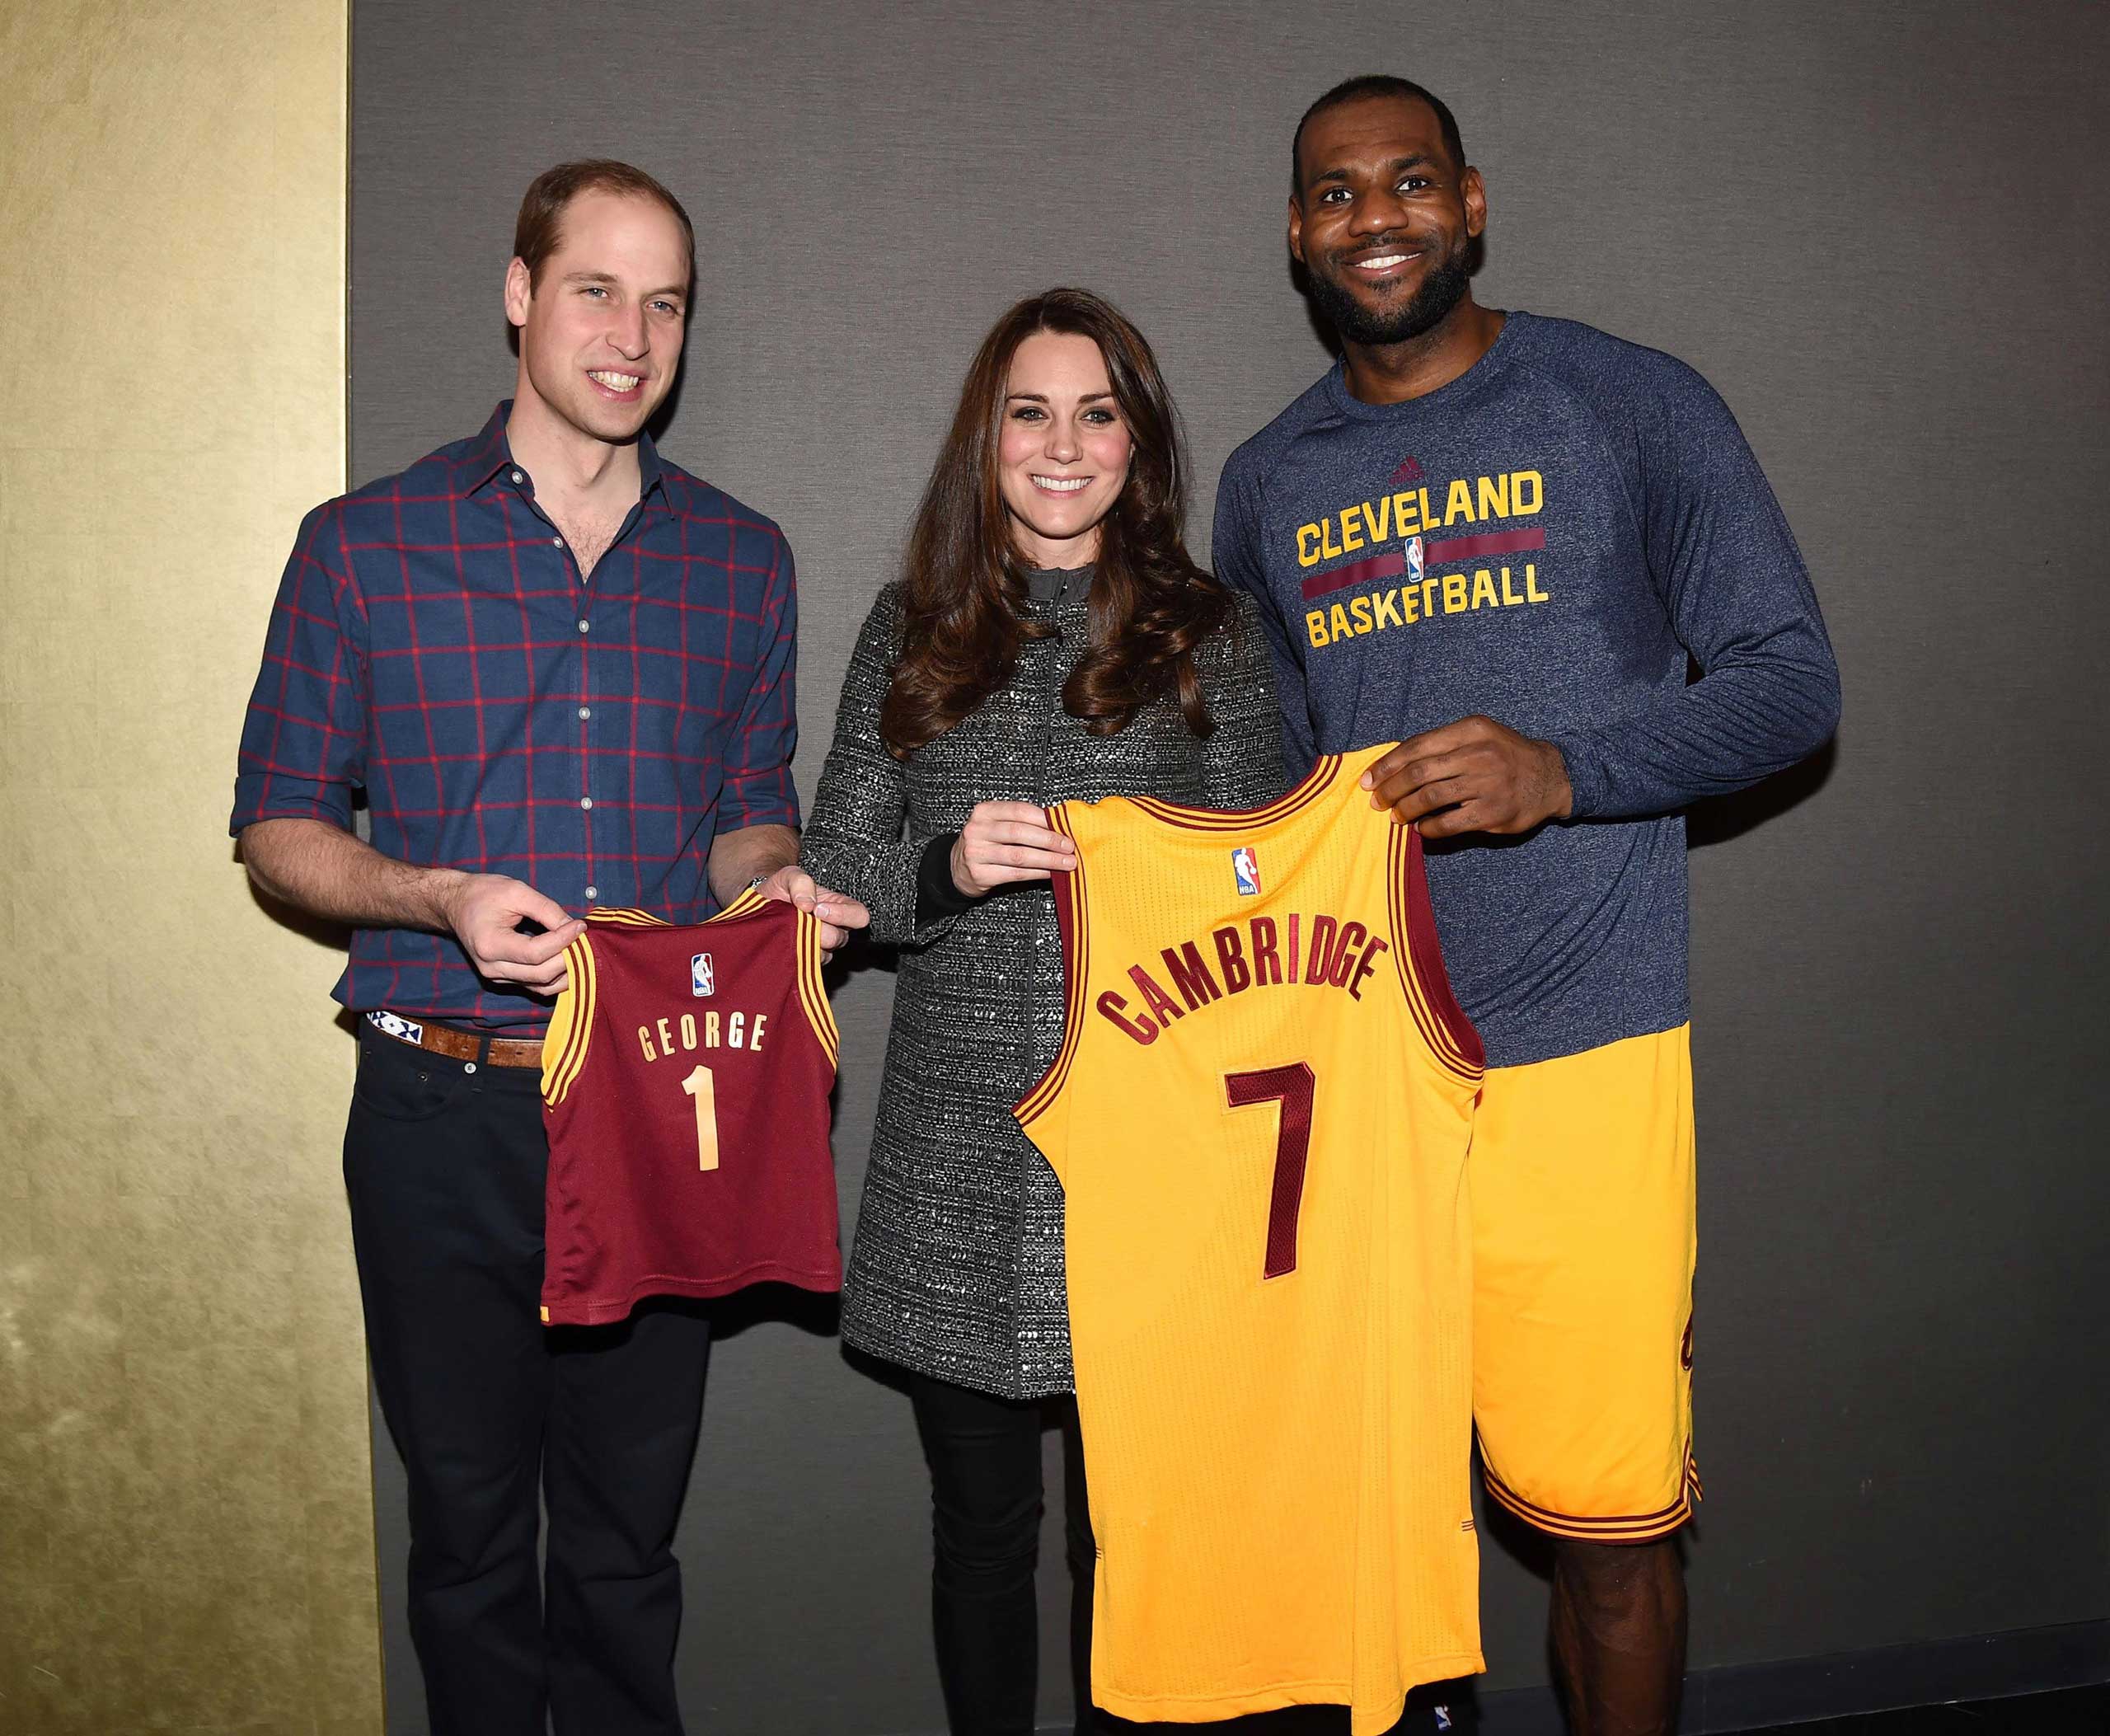 LeBron James presented the Duke and Duchess with two Cavaliers jerseys, including one for baby George.